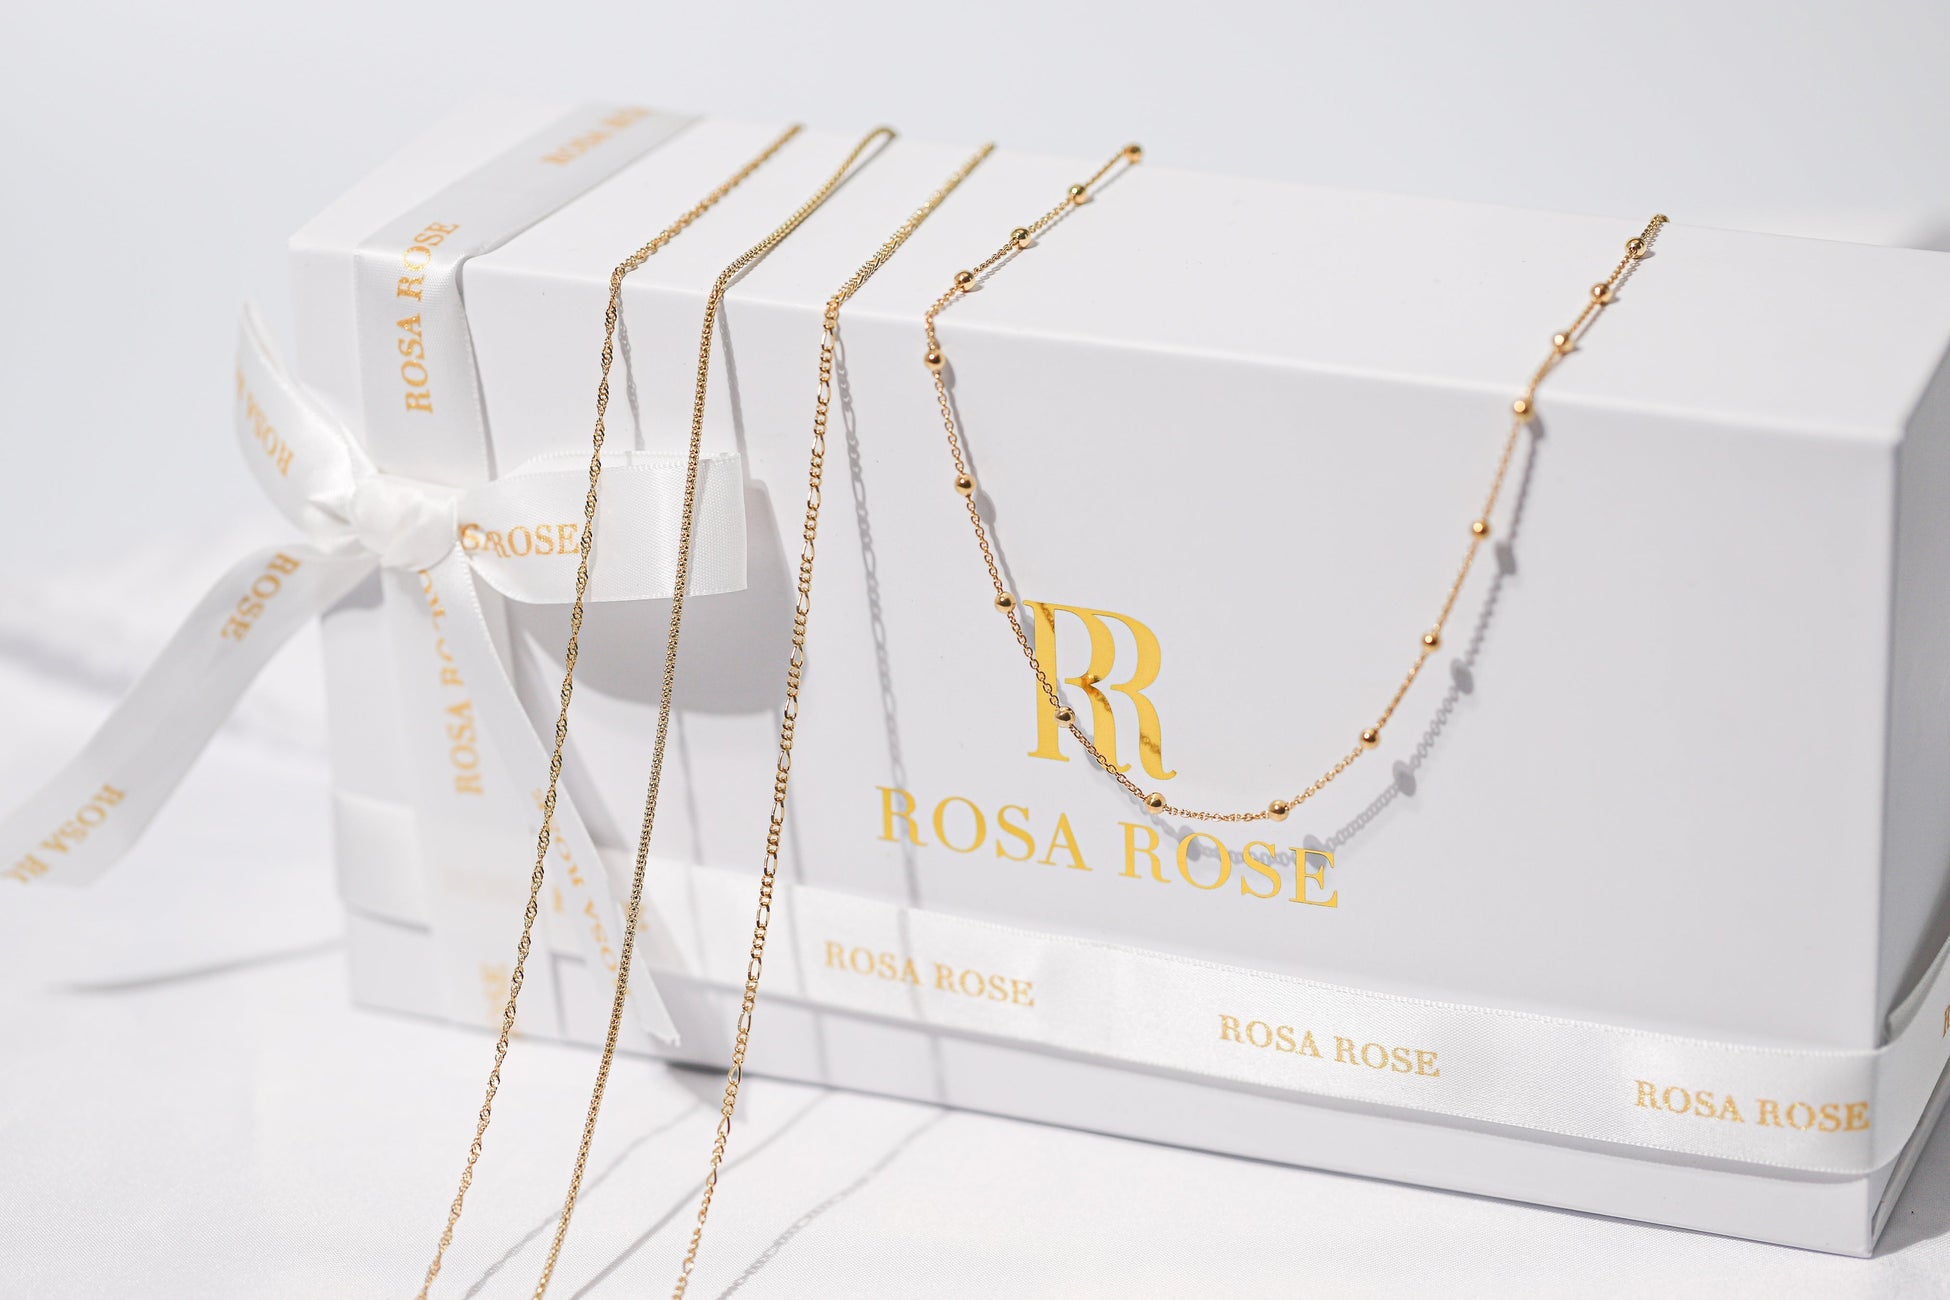 Top 2023 Holiday Gifts: Unique Rosa Rose Jewelry